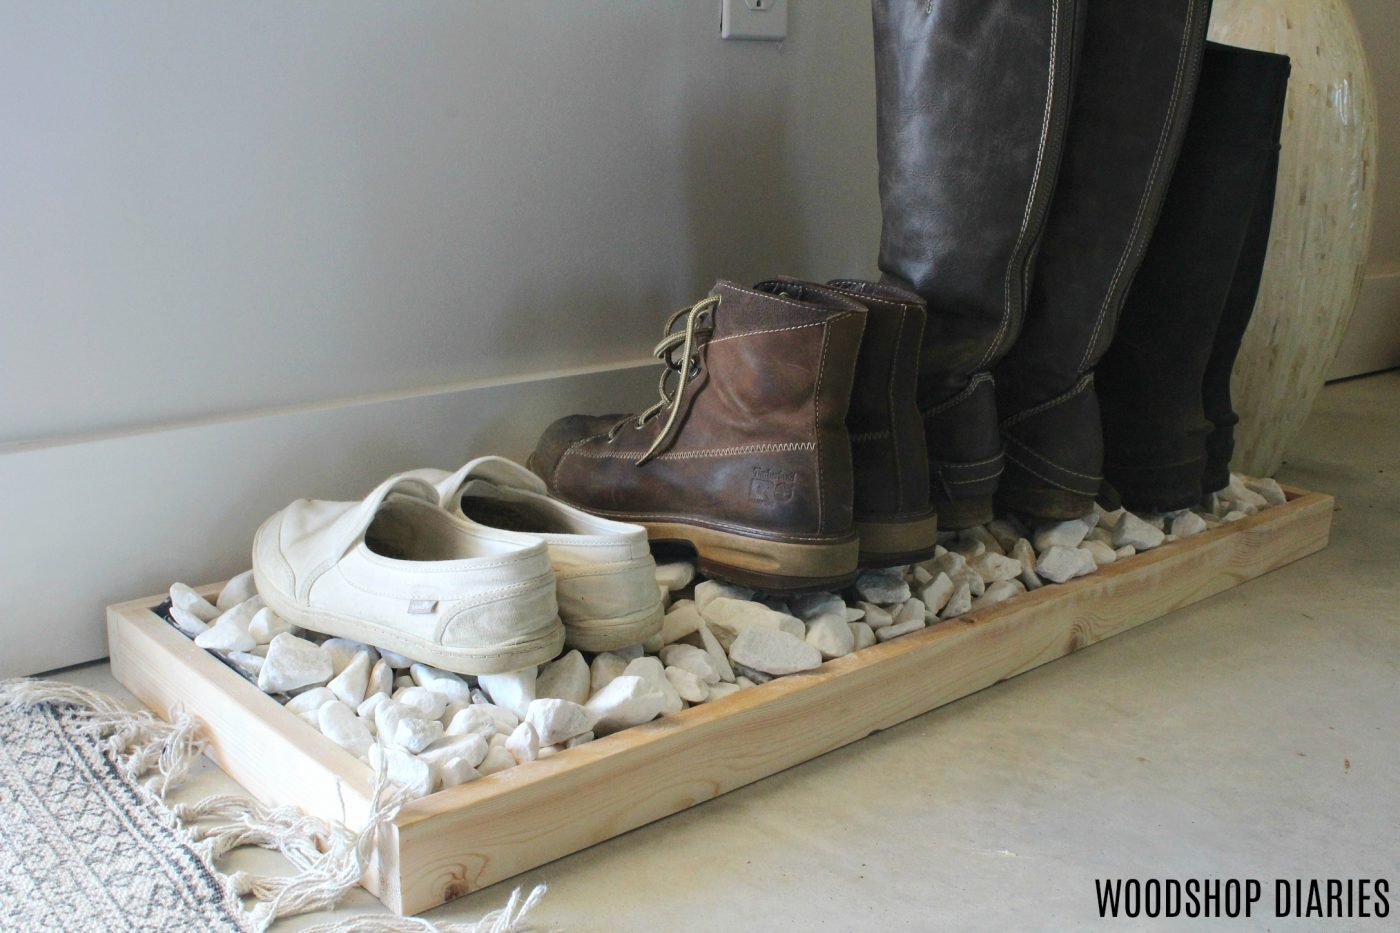 https://www.woodshopdiaries.com/wp-content/uploads/2018/10/DIY-Easy-Modern-Boot-Tray-Close-Up.jpg